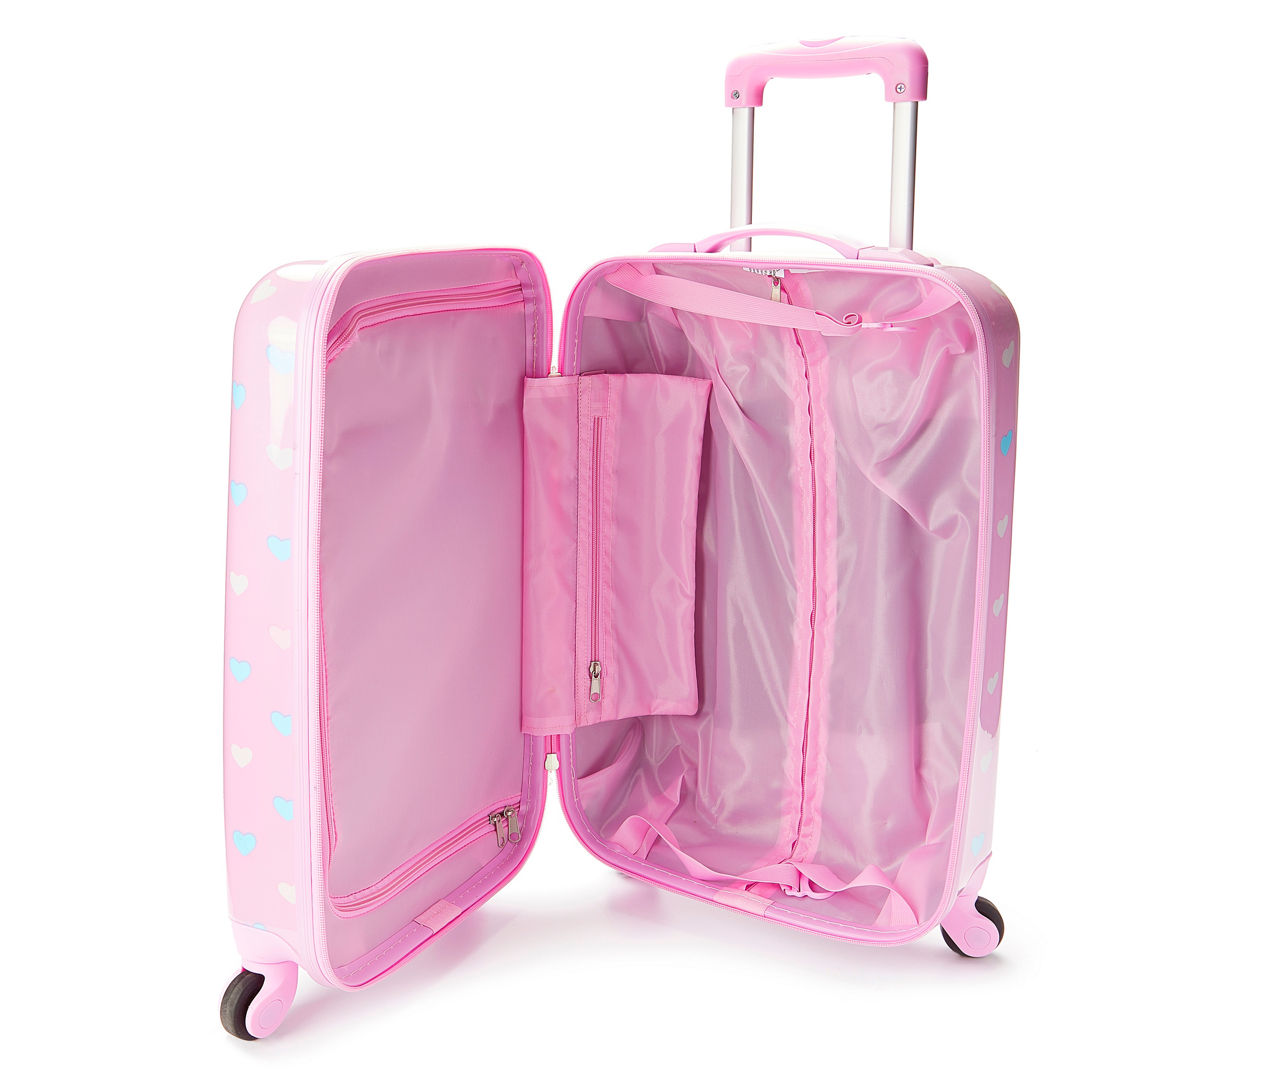 Celebrity Persuasion Hummingbird Pink Hearts Hard Shell Spinner Luggage Case | Big Lots